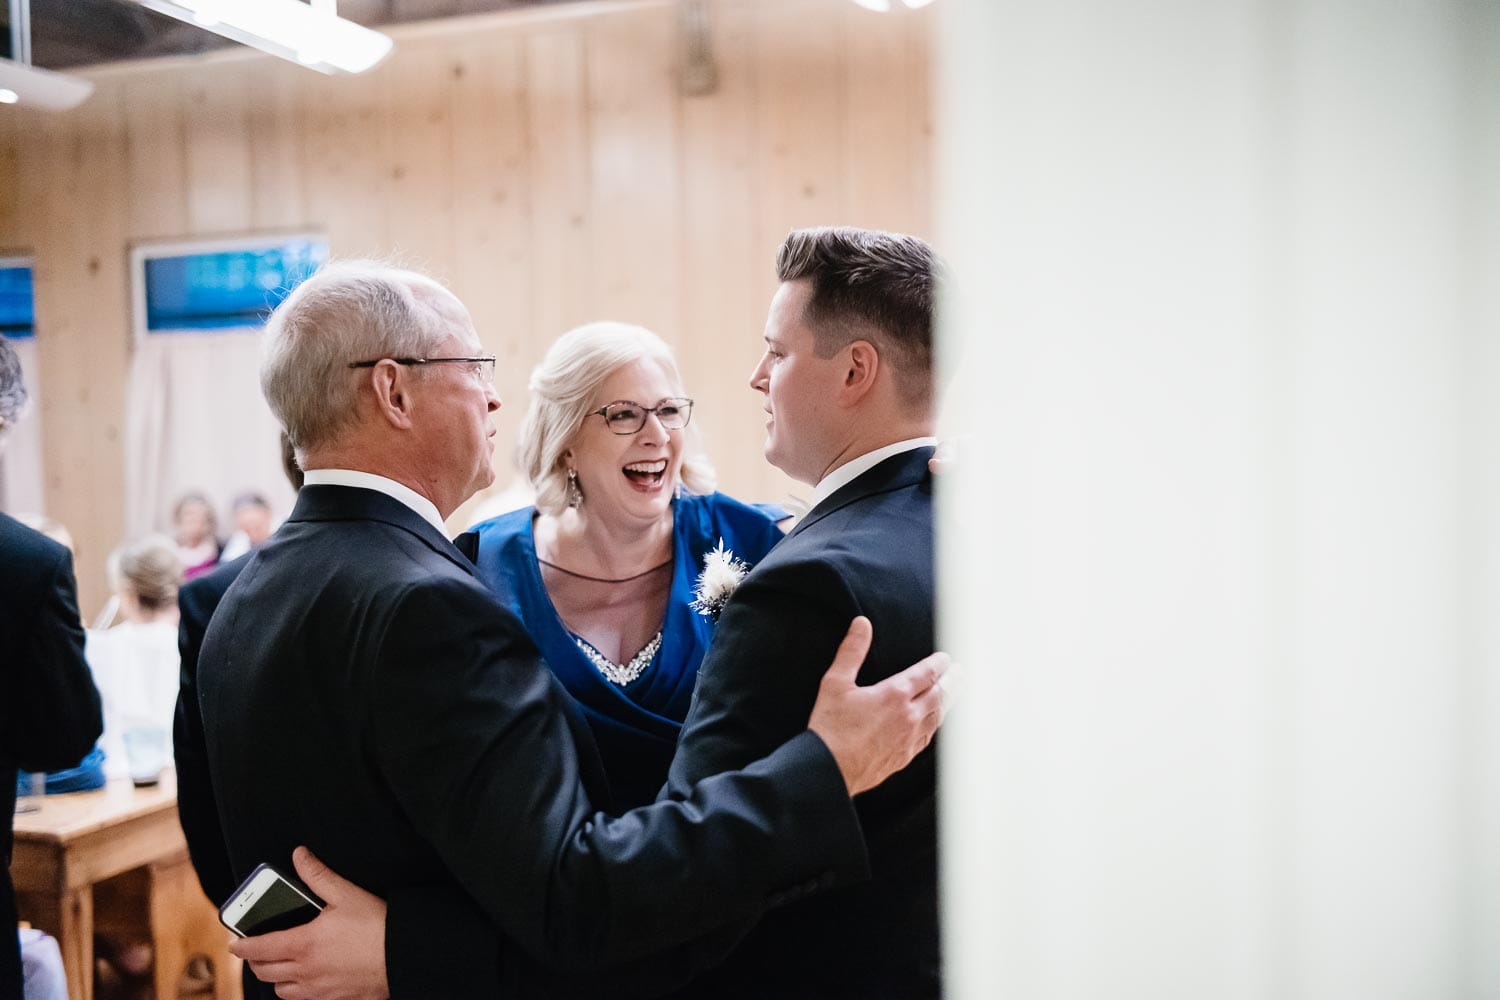 Dans mother and father share a laugh before wedding ceremony